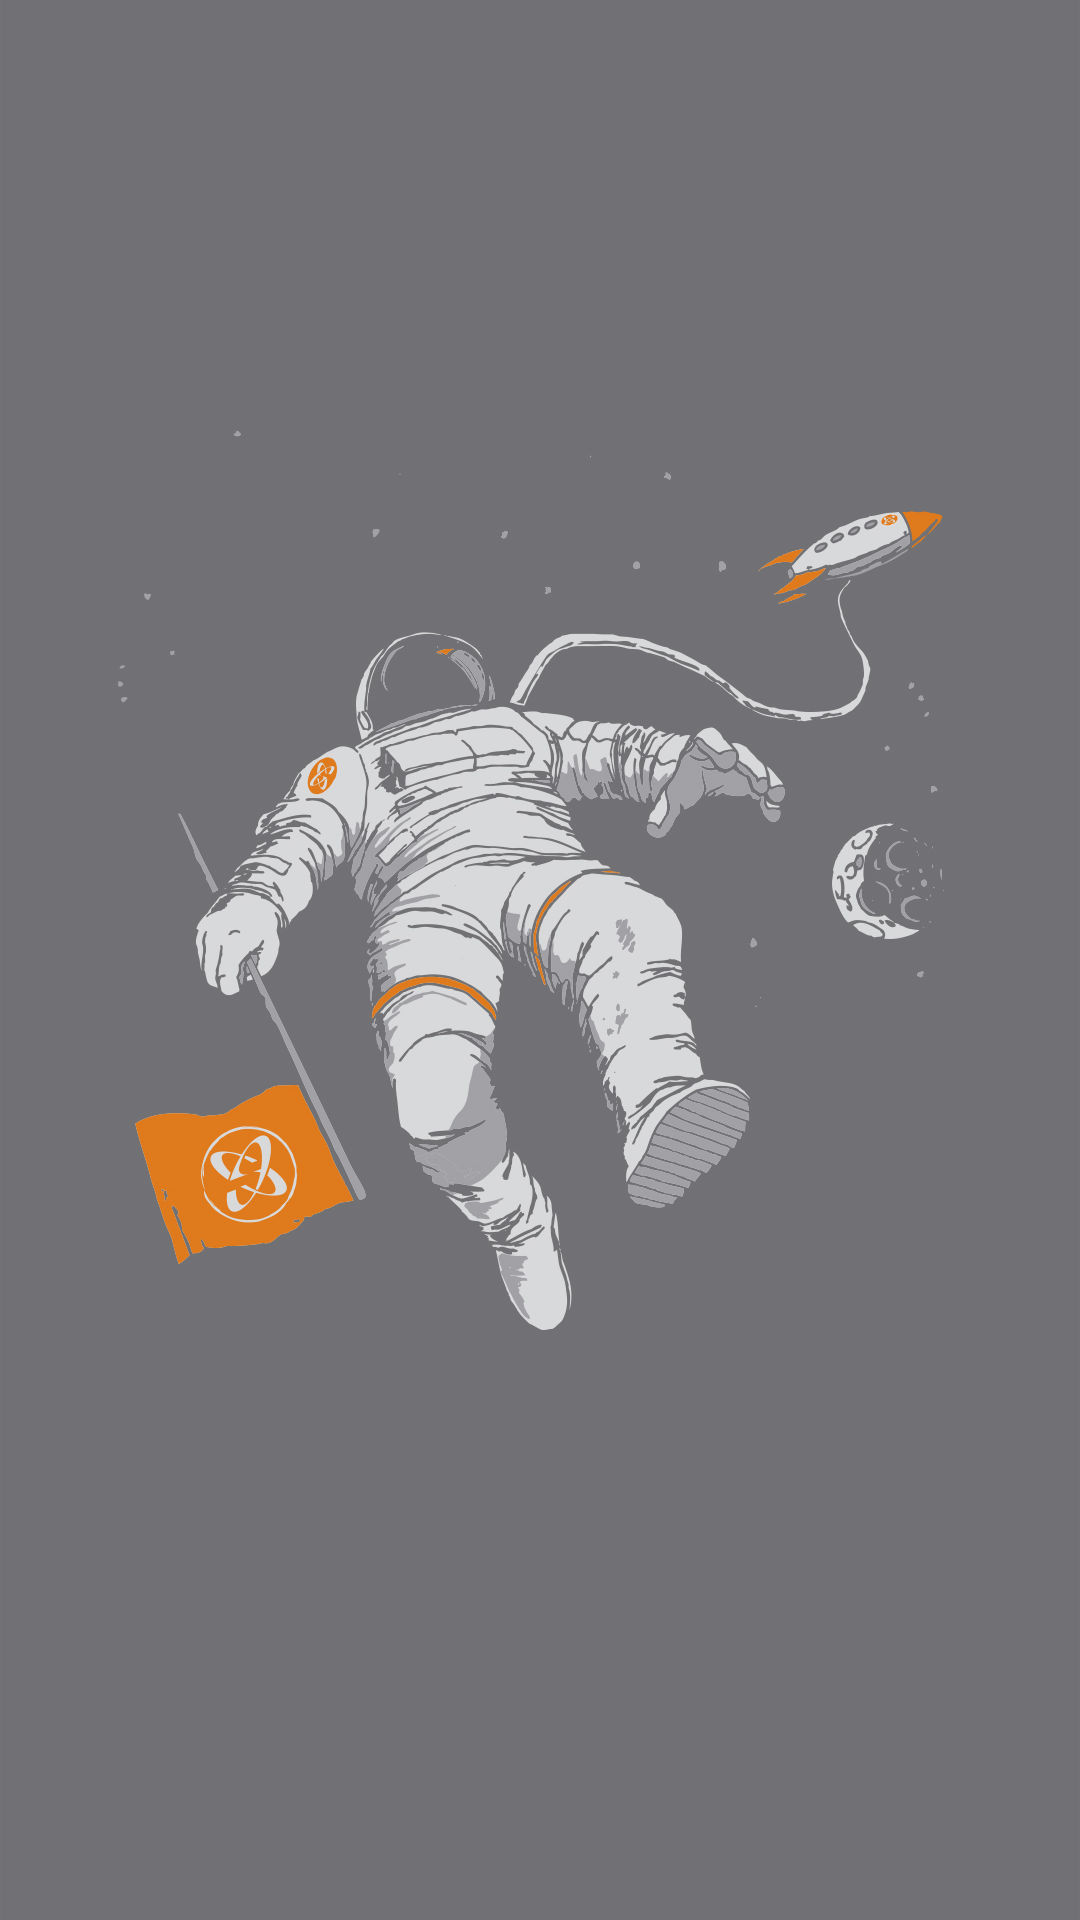 Astronaut Wallpaper Images  Free Photos PNG Stickers Wallpapers   Backgrounds  rawpixel